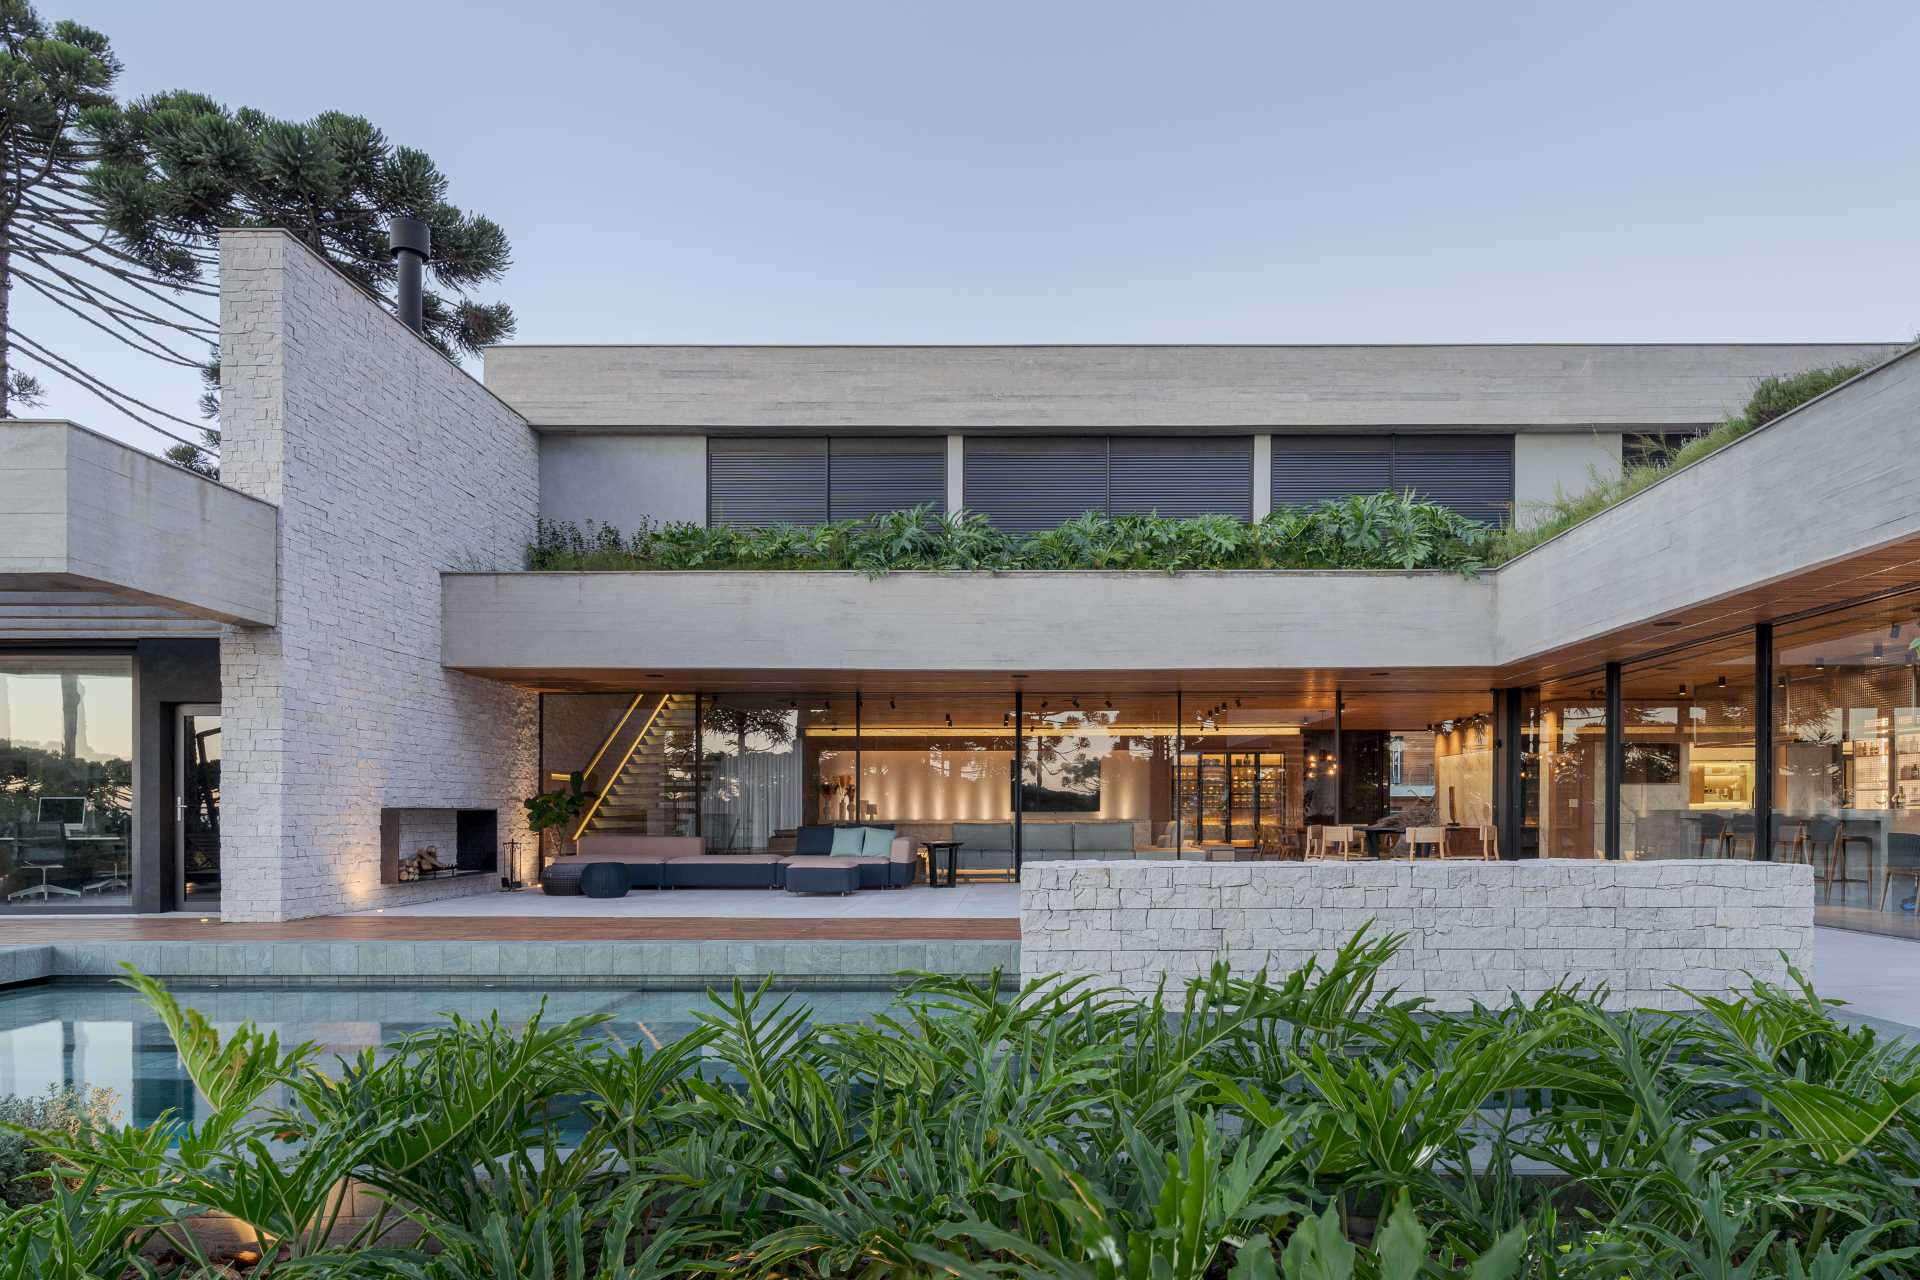 Architecture firm StudioColnaghi has designed a modern home in Brazil, that features a material palette of concrete, wood, and natural stone.